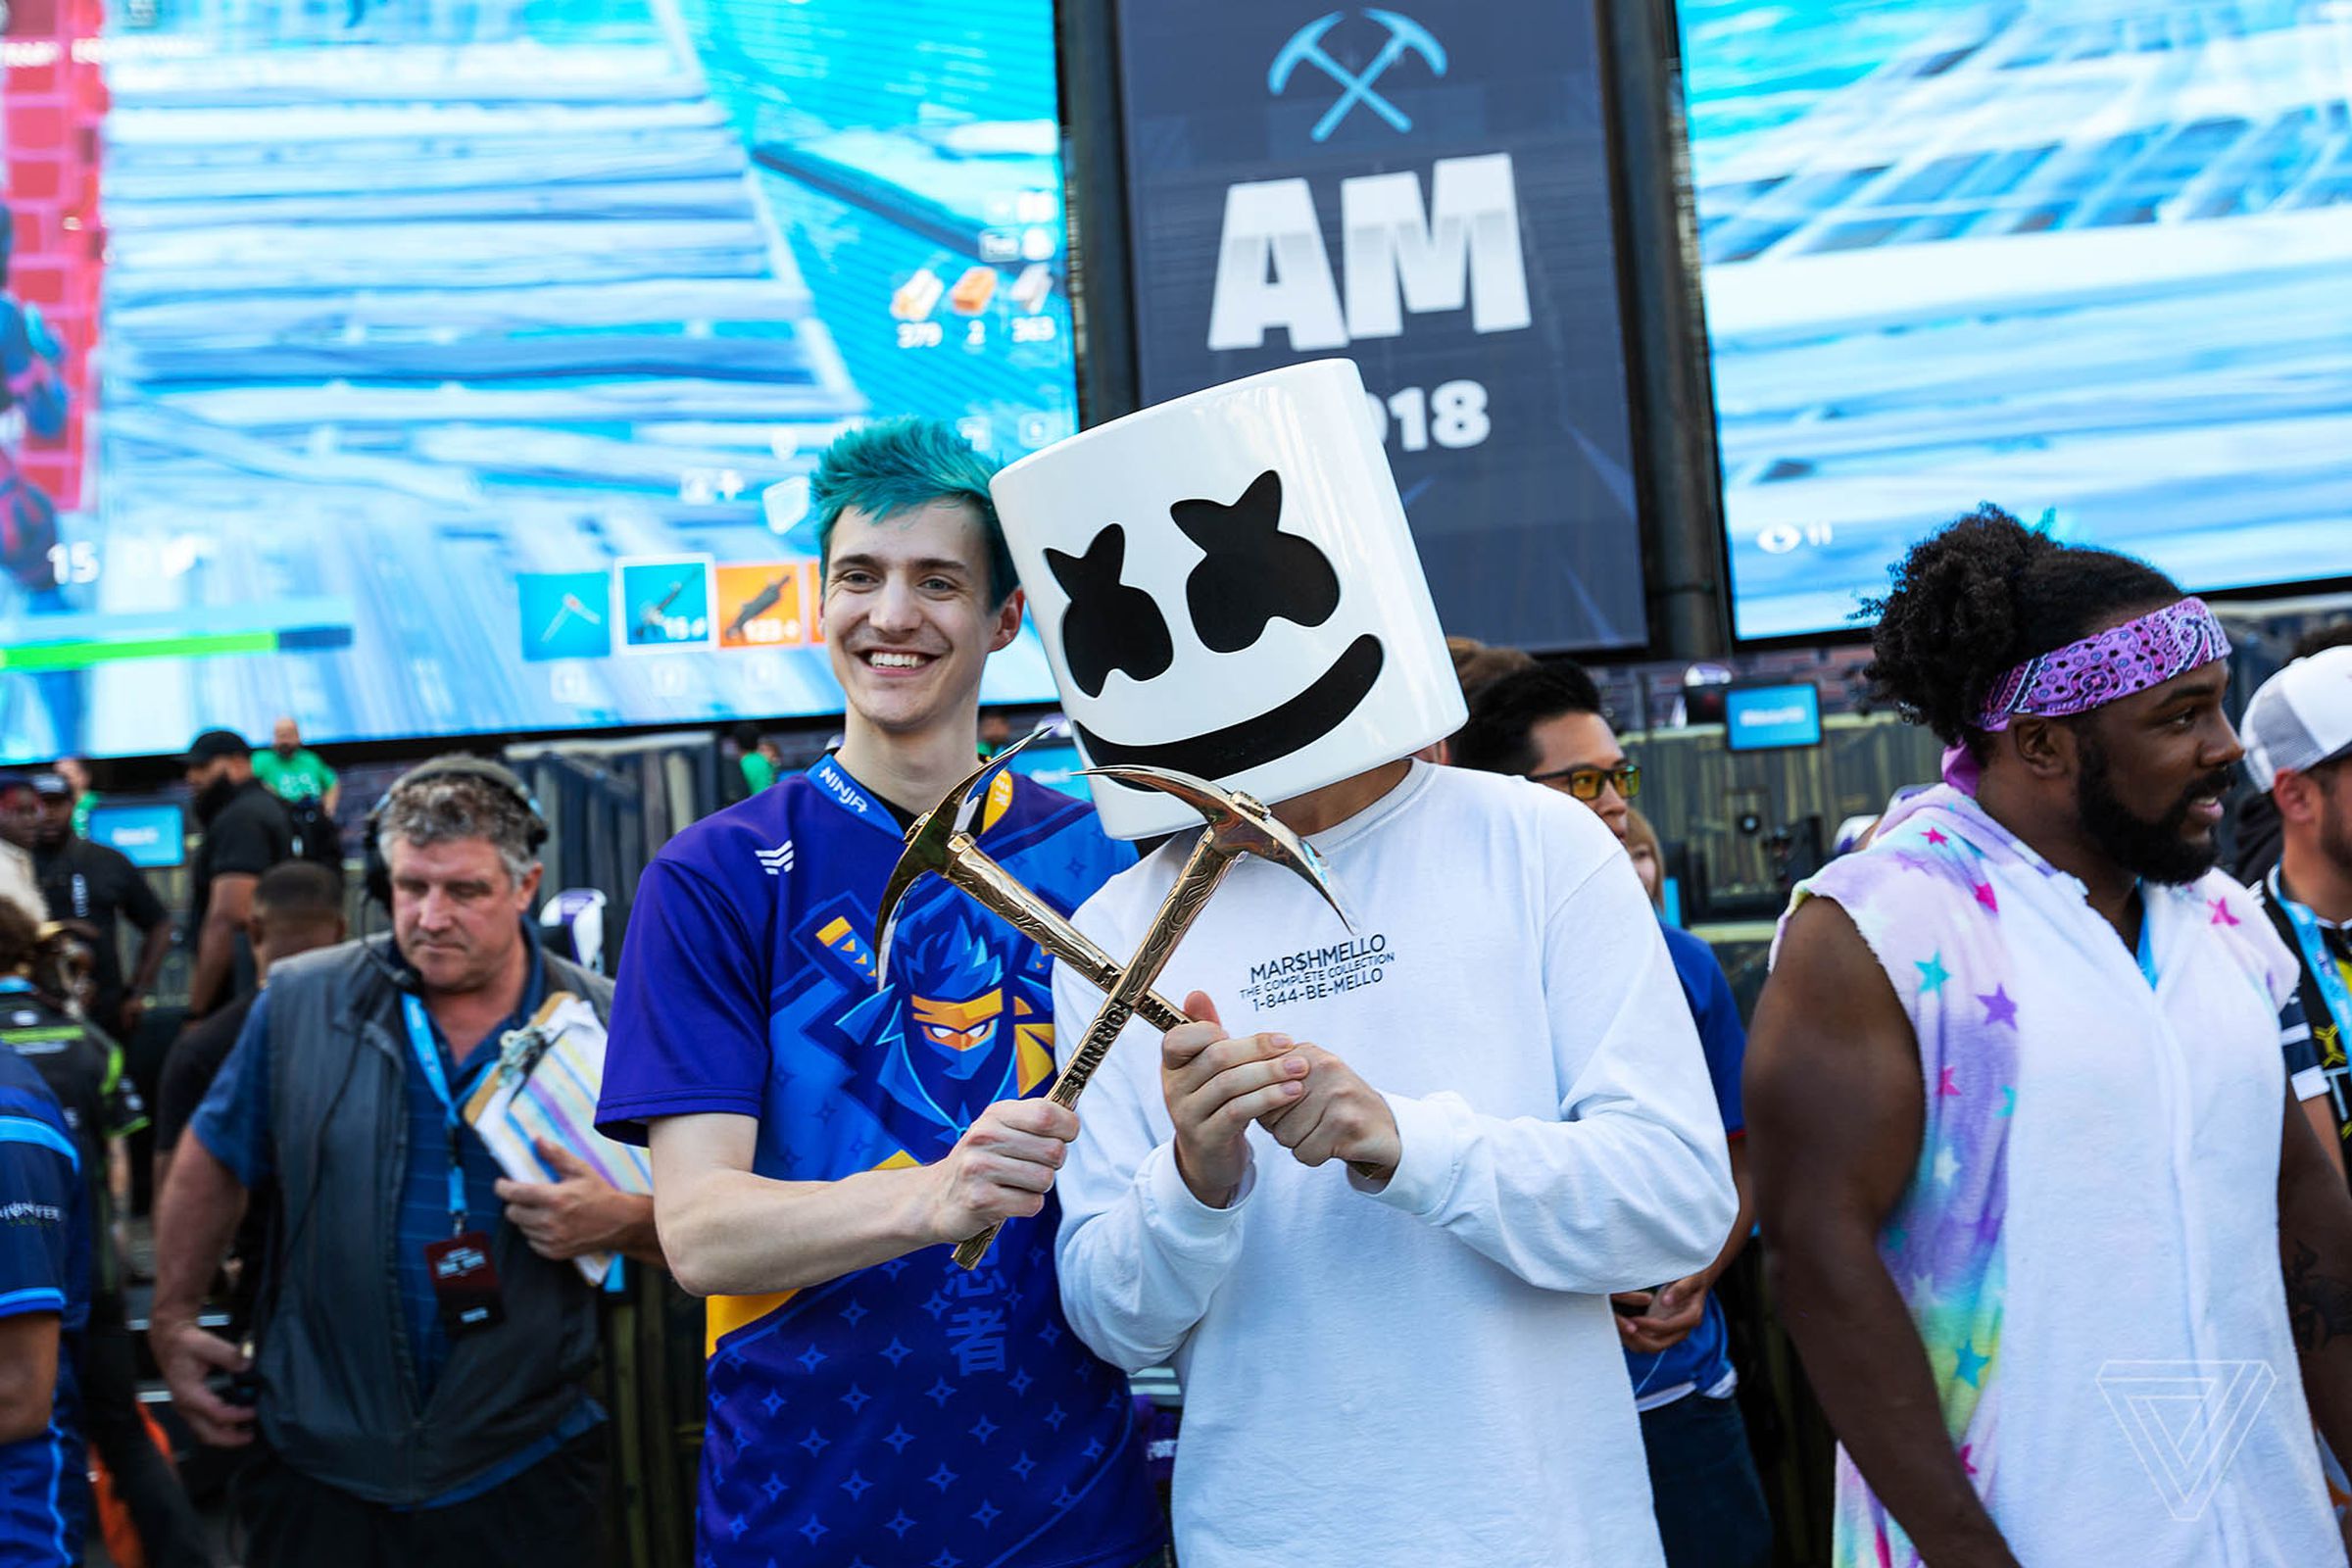 Twitch streamer Tyler “Ninja” Blevins and electronic music artist Marshmellow pose for photographs after winning the final round of Epic Games’ Fortnite Pro-Am competition. 